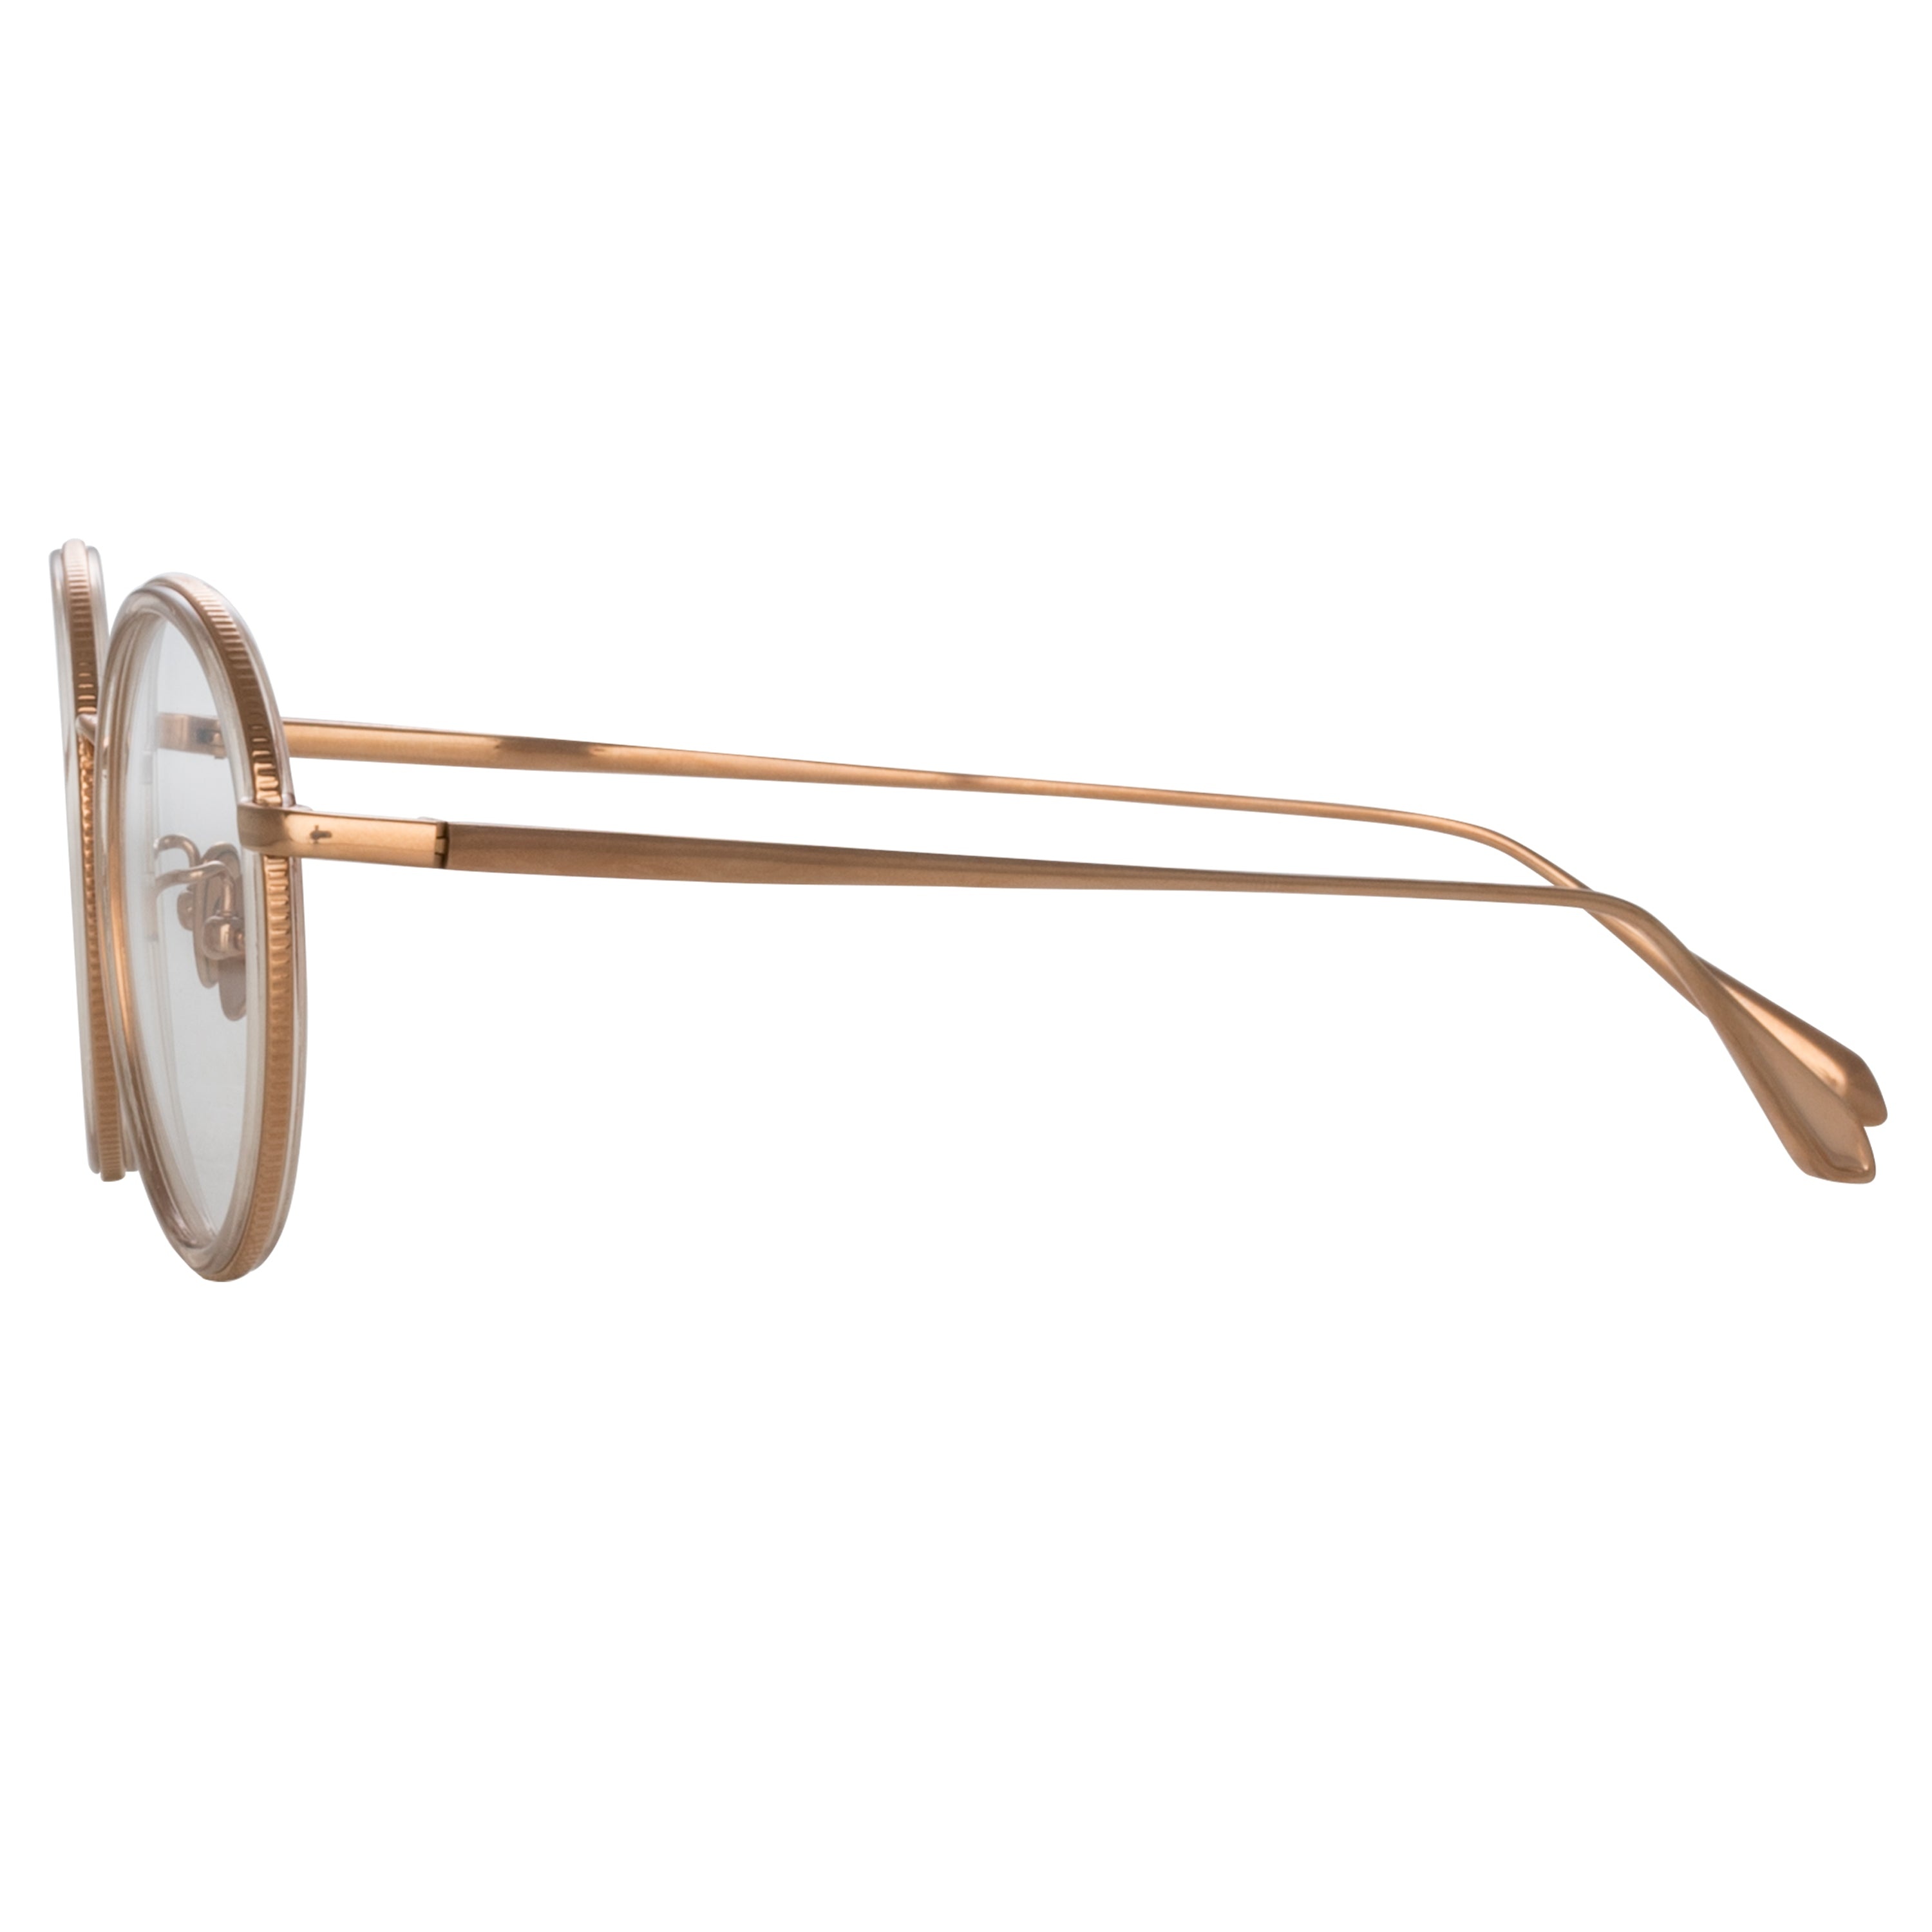 SATO OVAL OPTICAL FRAME IN ROSE GOLD - 3